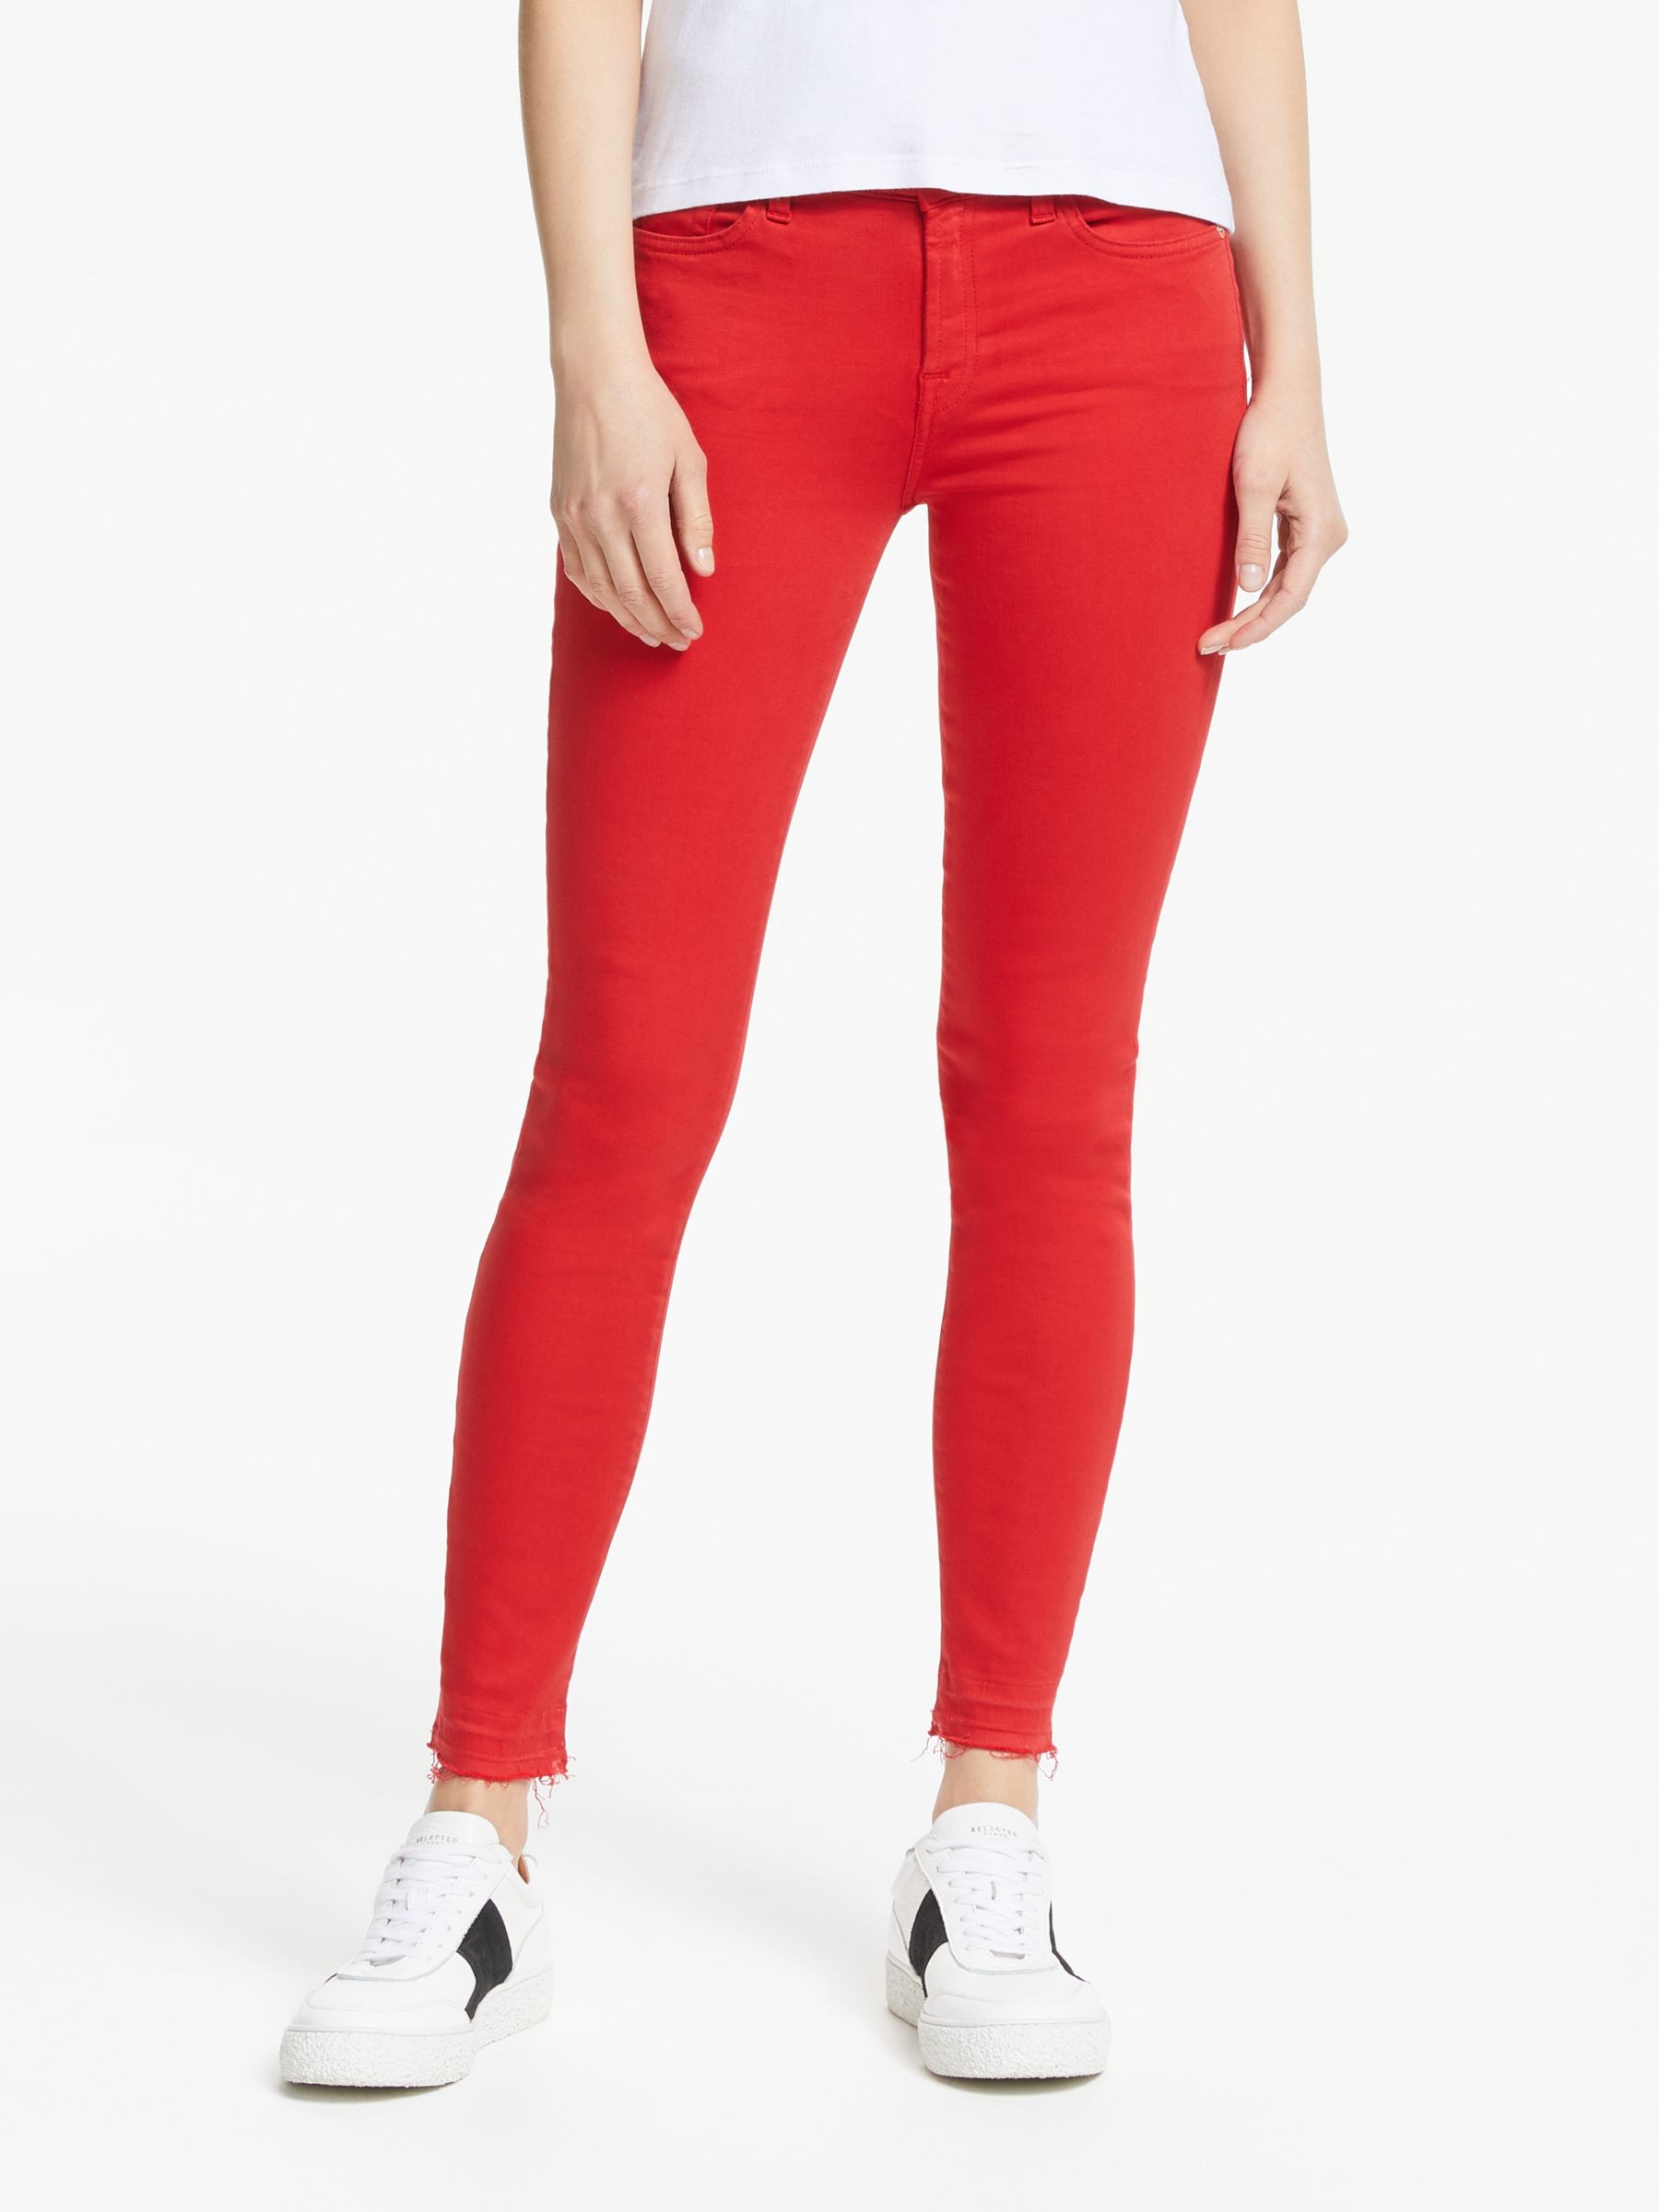 all red jeans